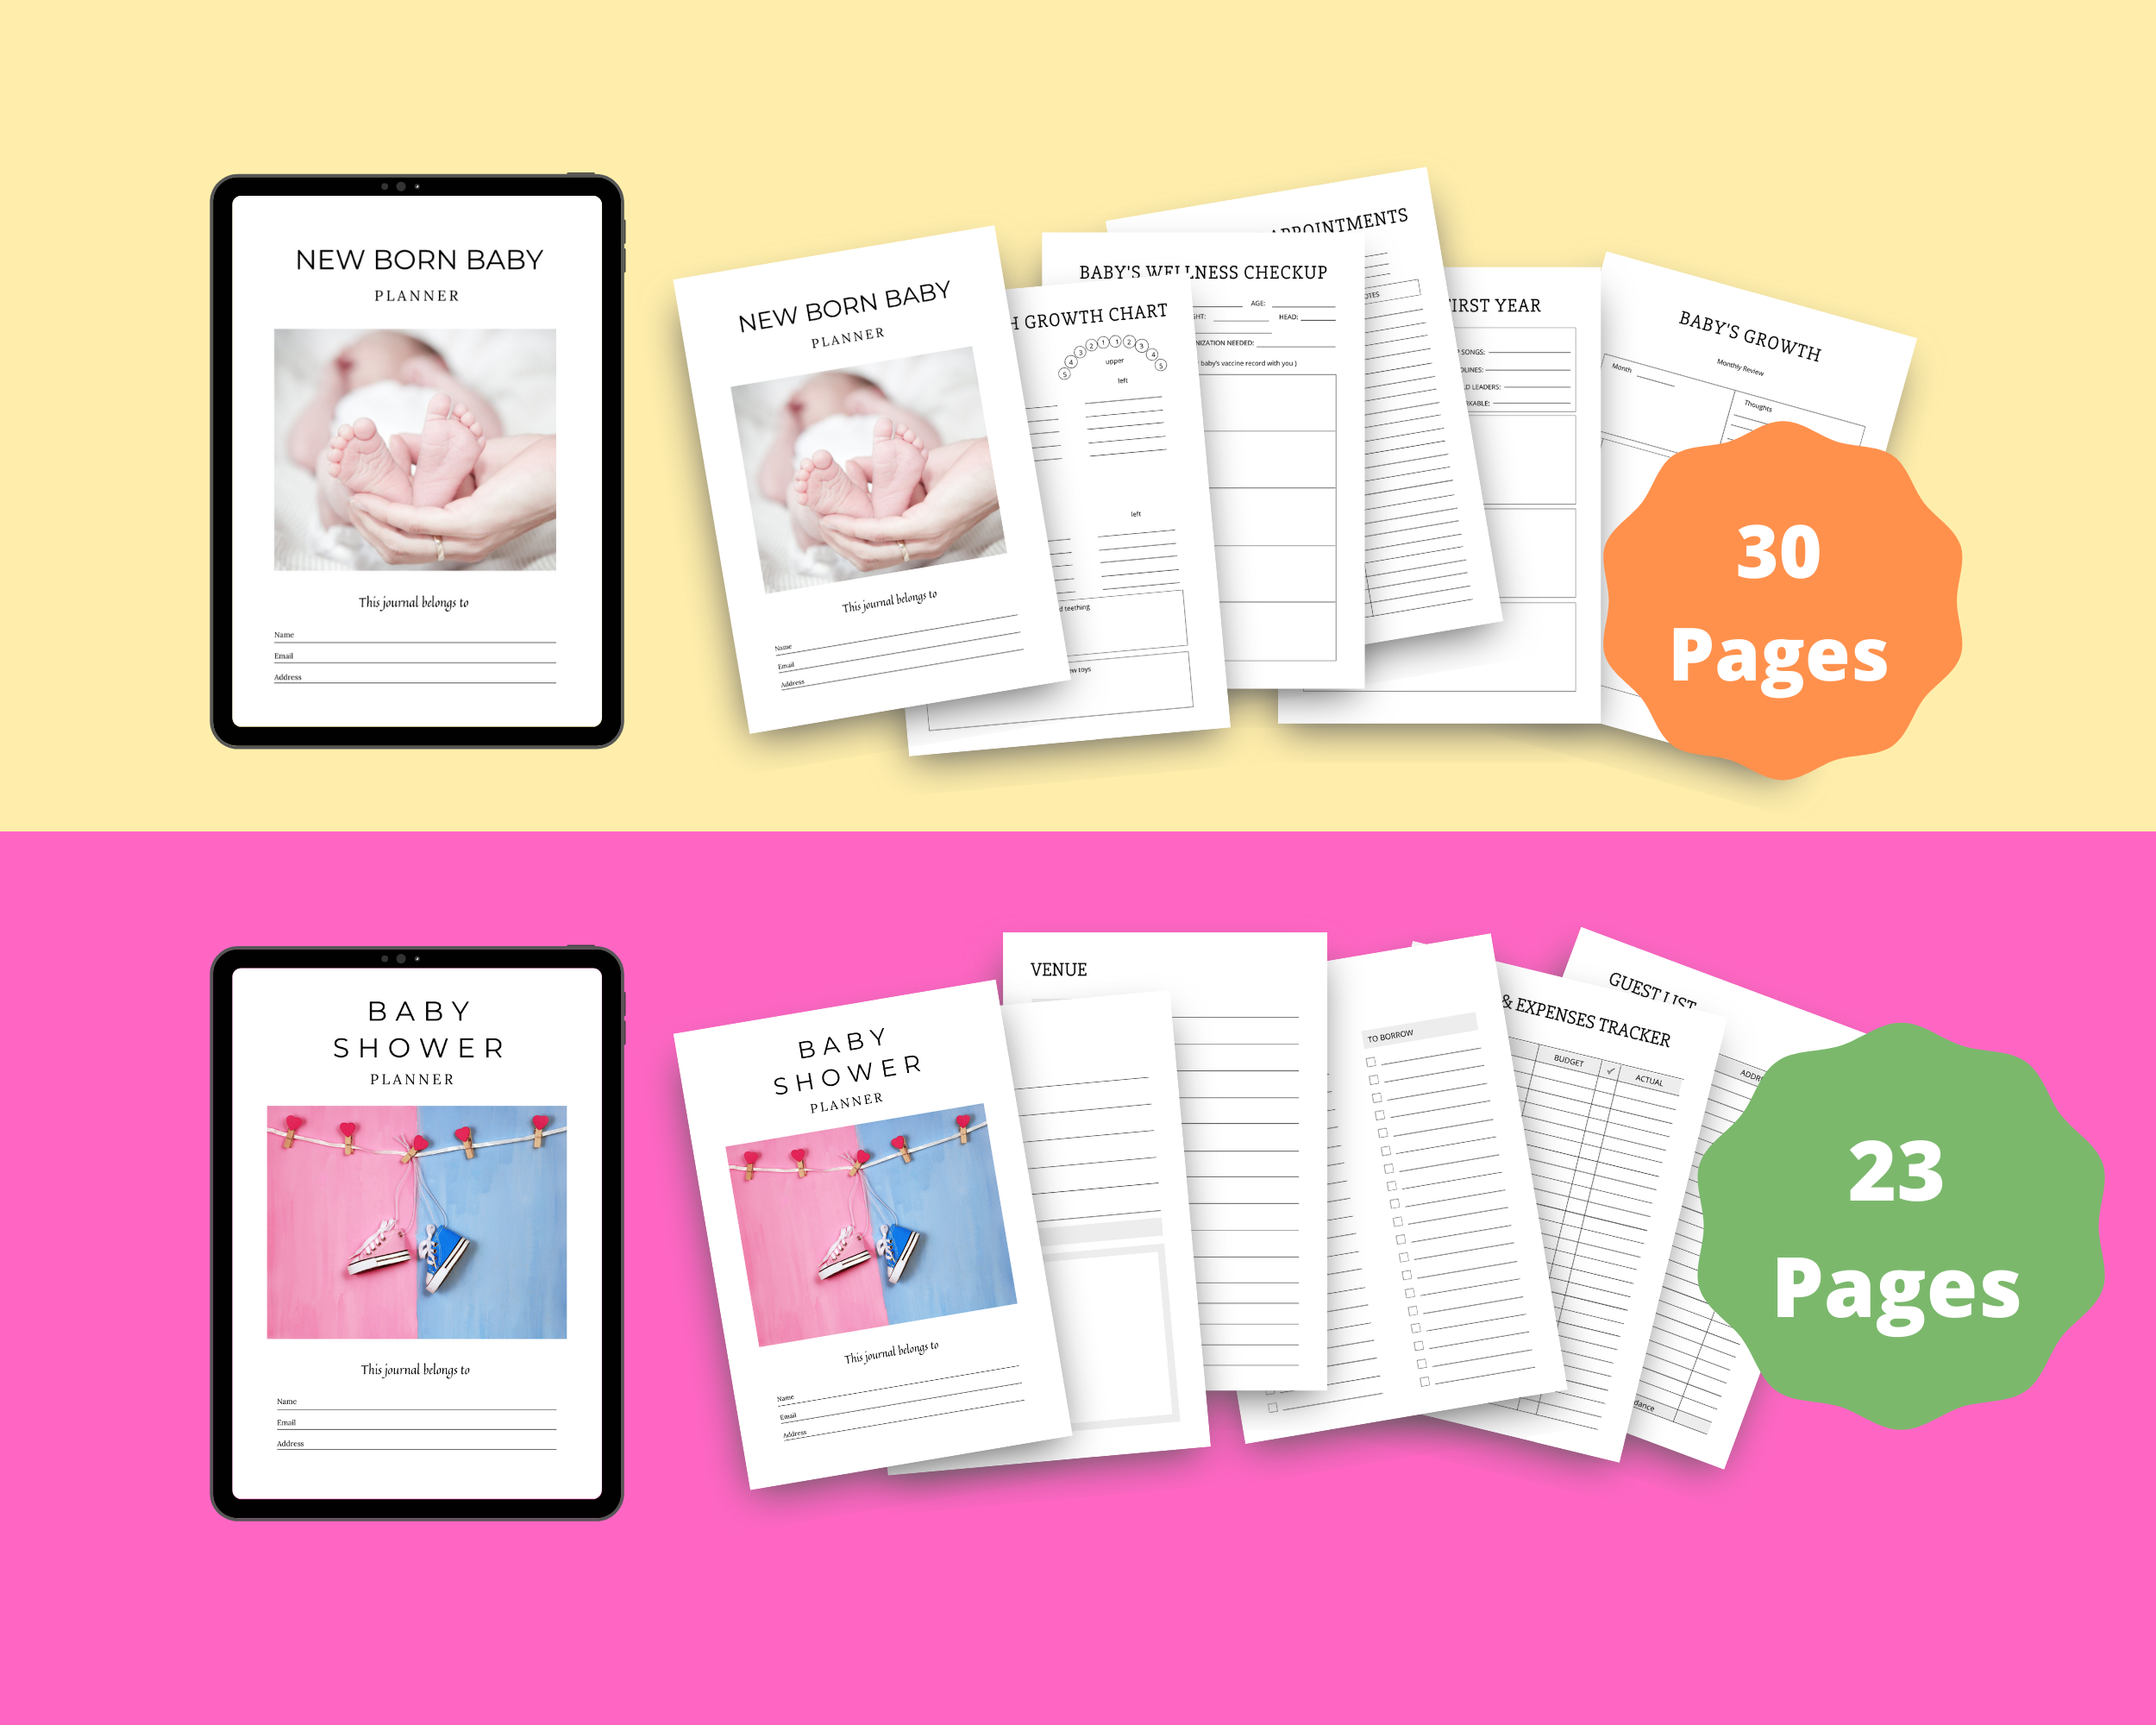 BUNDLE of 7 Female Planners in Canva | Customizable | Editable Canva Templates | Commercial Use | Pregnancy Planners